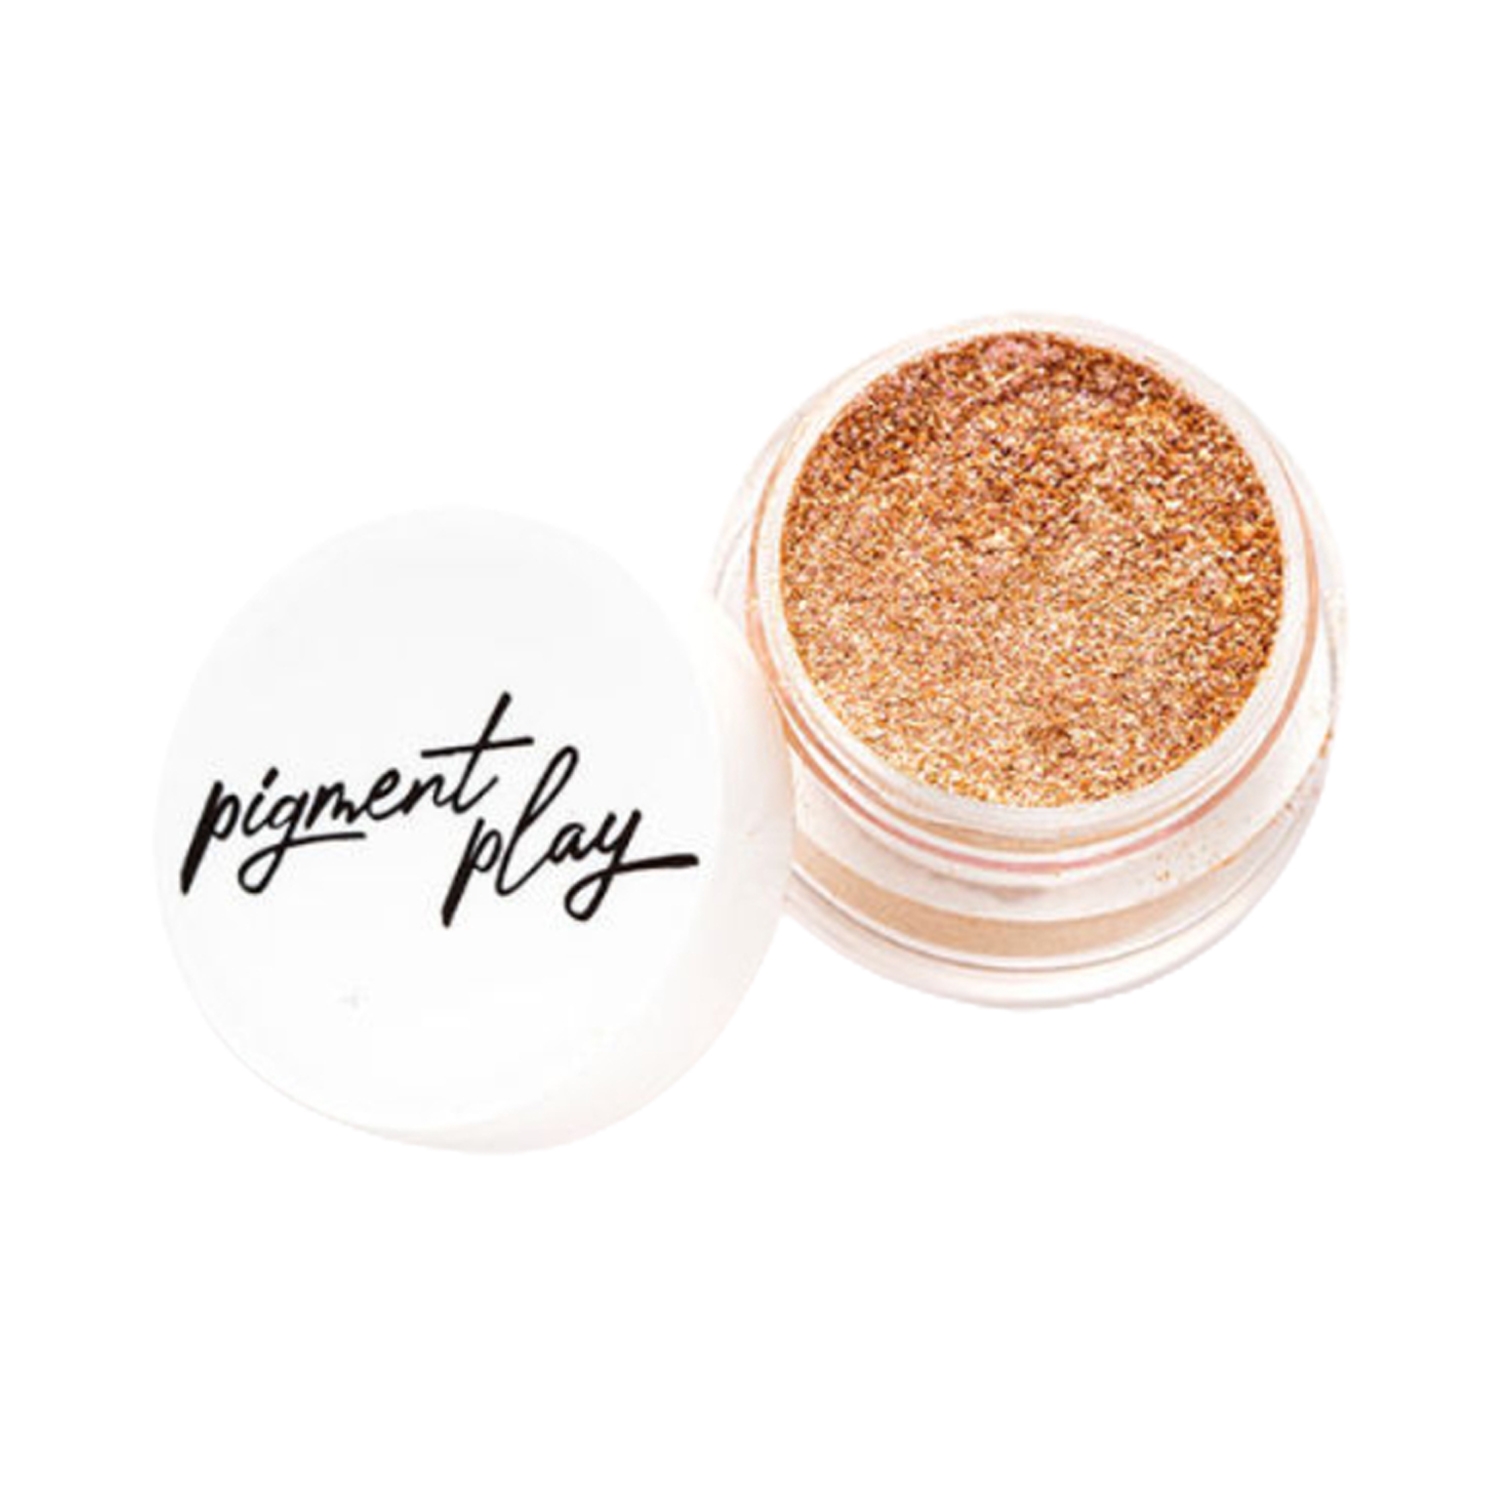 Pigment Play | Pigment Play Iridescent Loose Pigment Powder - Blushing Gold (2g)